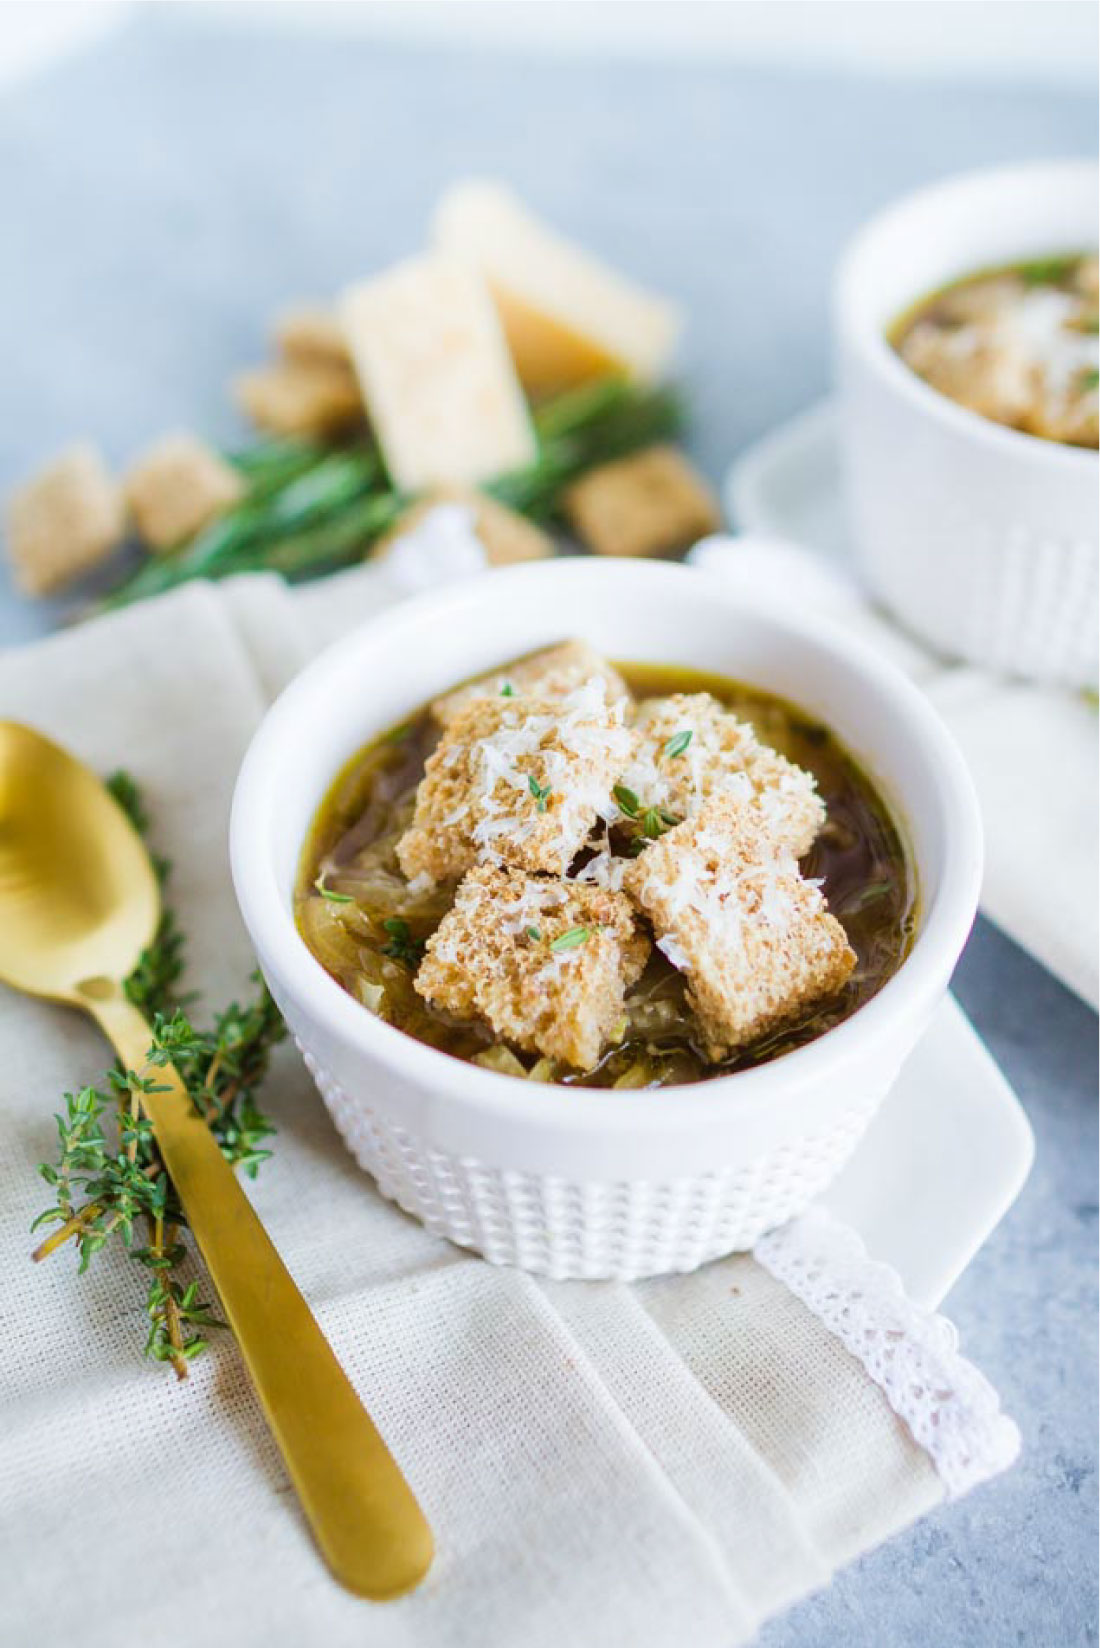 Lightened Up French Onion Soup - a delicious take on an old classic from Movara Fitness Resort